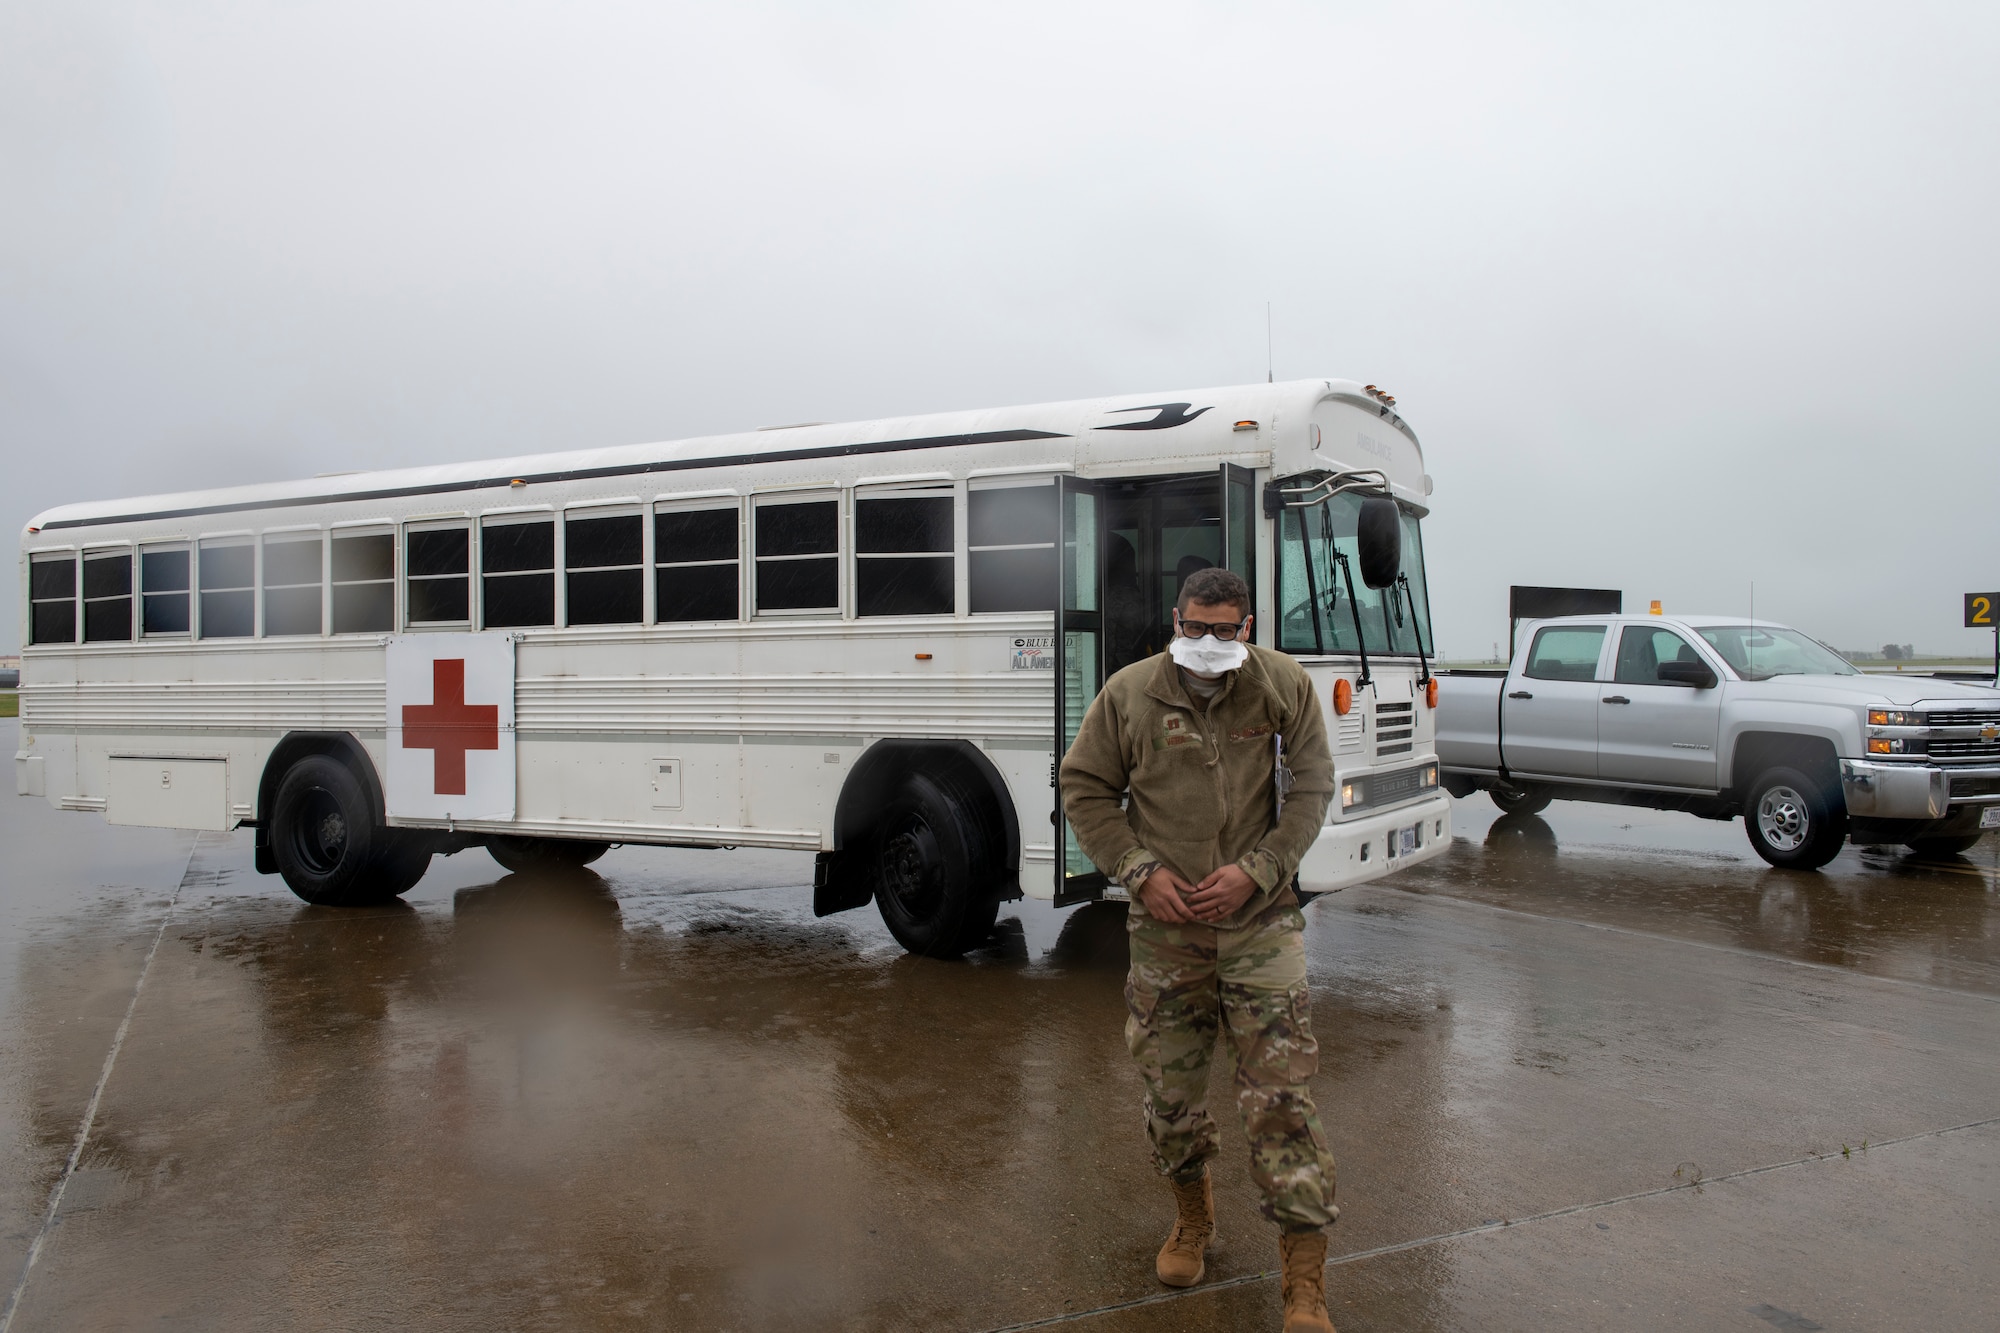 An Airman stands outside of a bus.